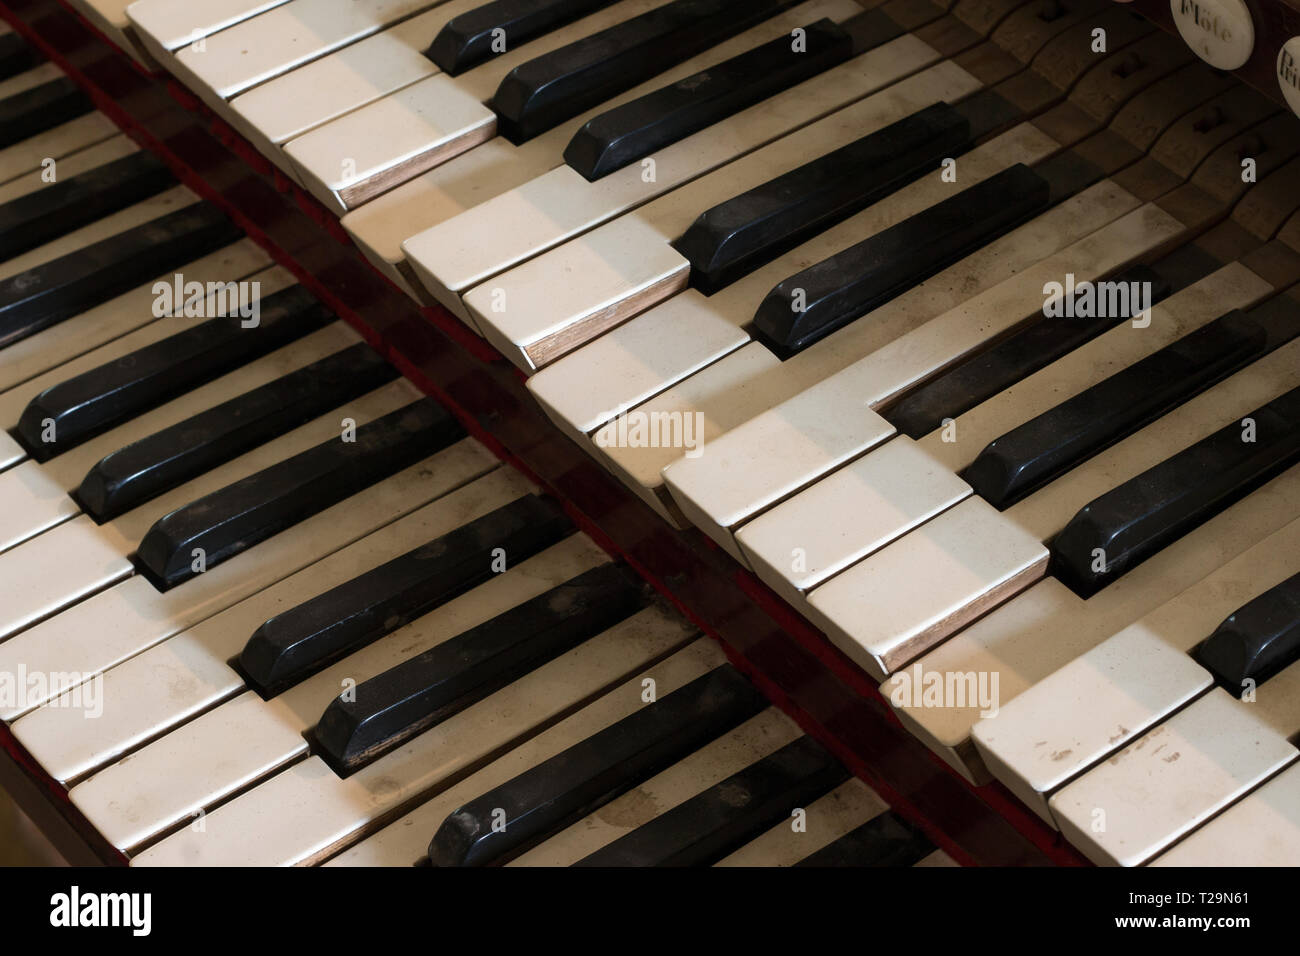 Detail of old, damaged and dusty organ keys Stock Photo